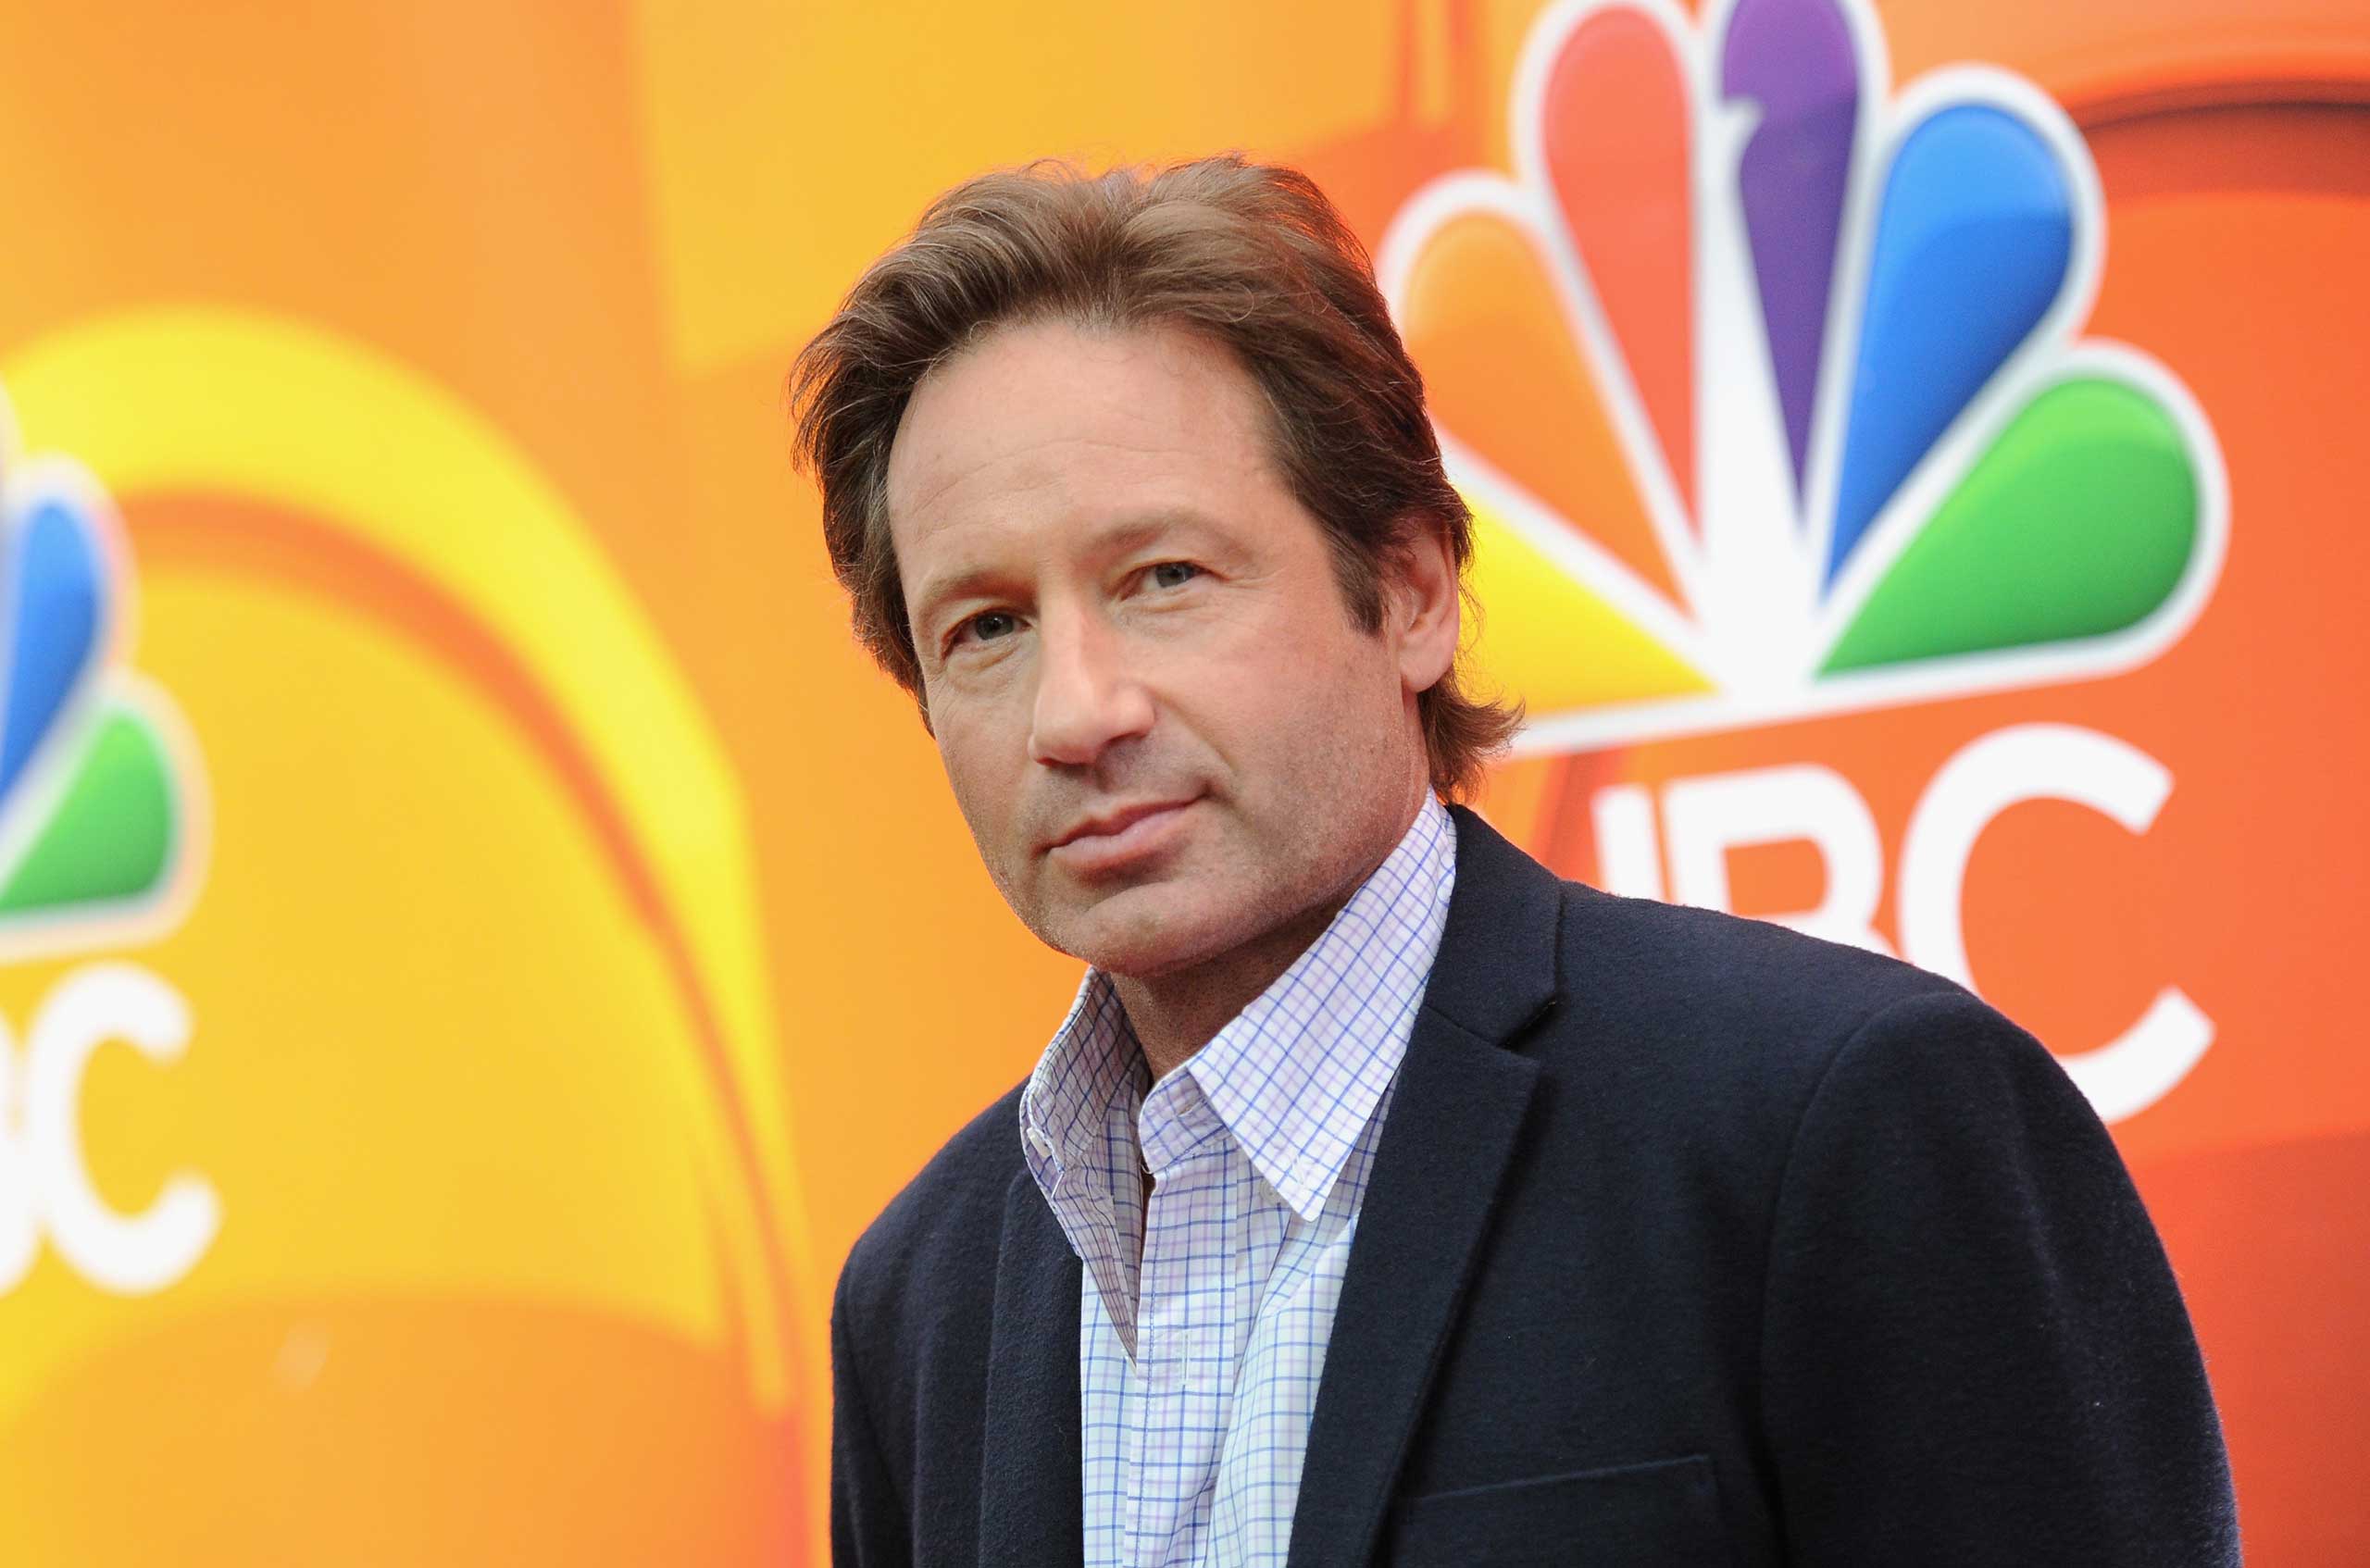 David Duchovny at Radio City Music Hall in New York on May 11, 2015. (Andrew Toth/FilmMagic/Getty Images)